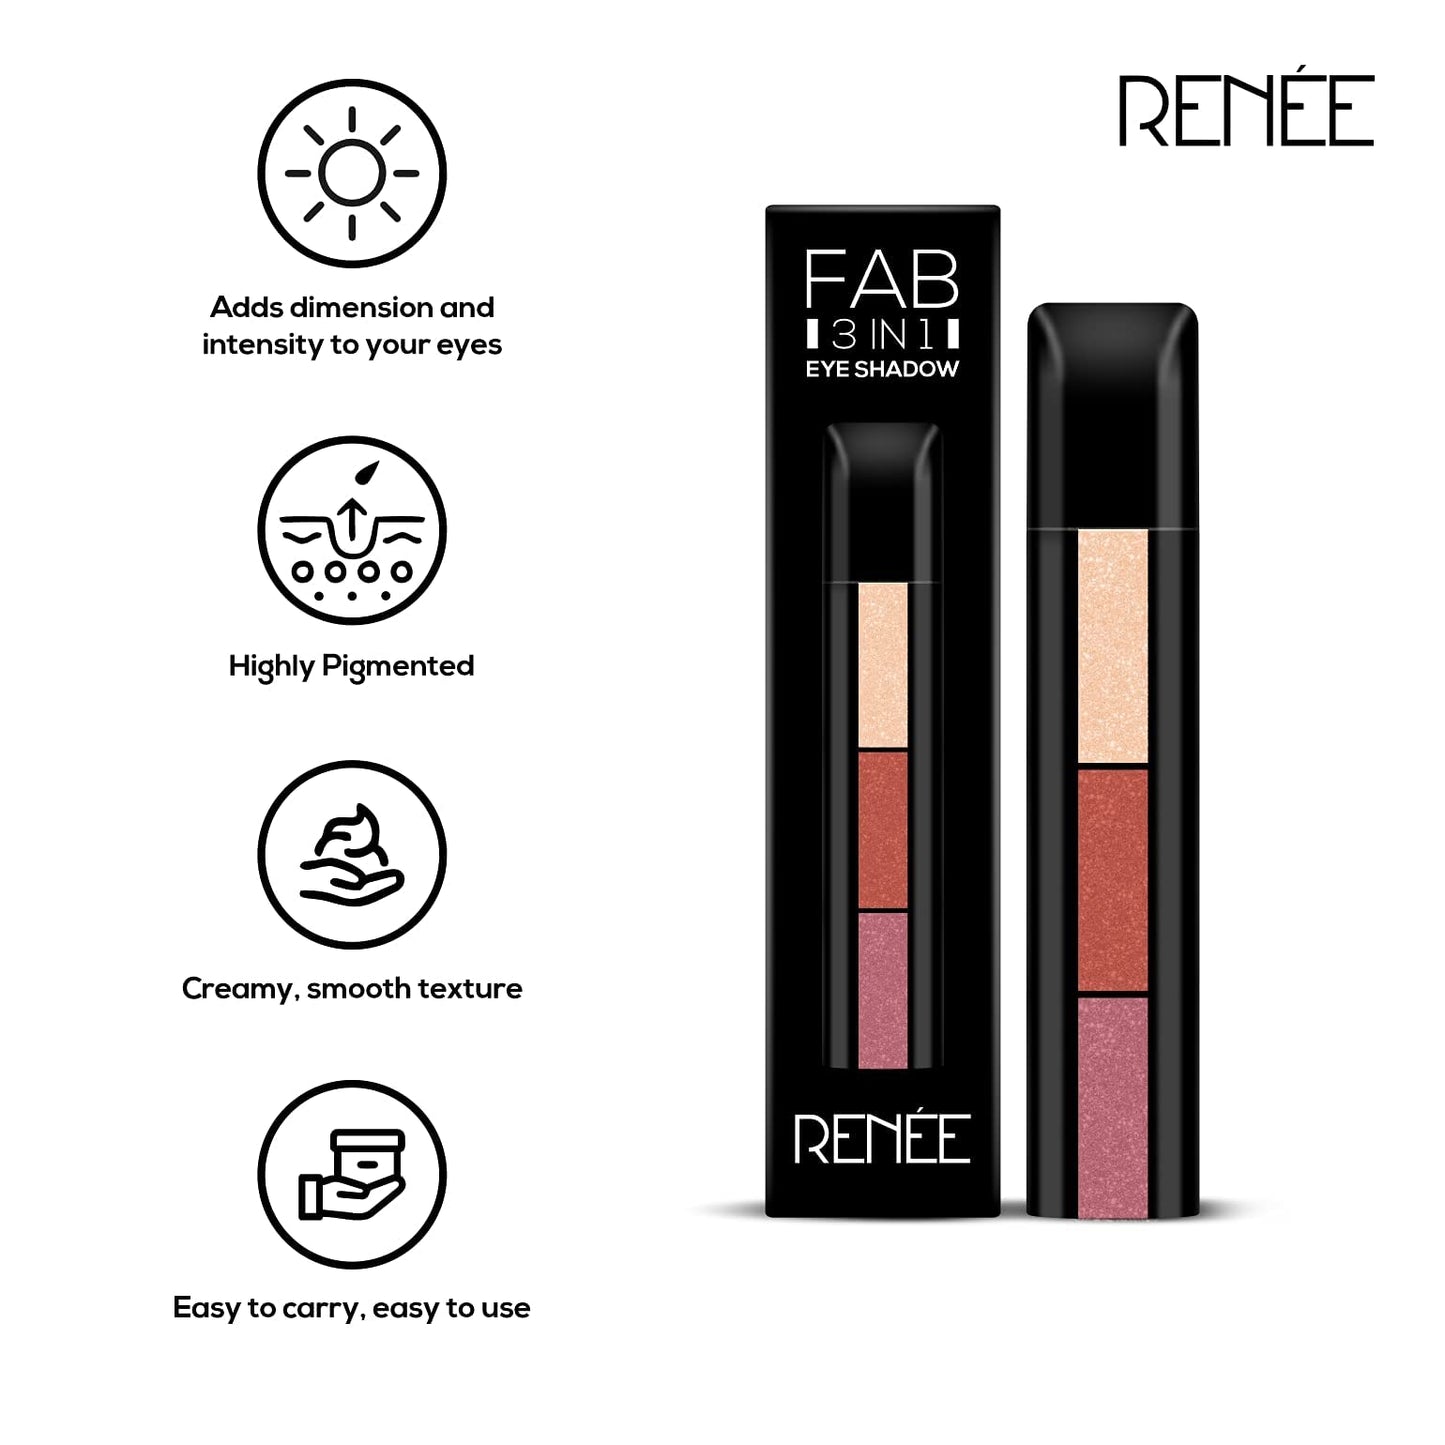 RENEE Fab 3 in 1 Eyeshadow 4.5gm - Highly Pigmented 3 Shades in 1 Stick, Adds Dimension and Intensity With Shimmery Finish, Enriched With Vitamin E